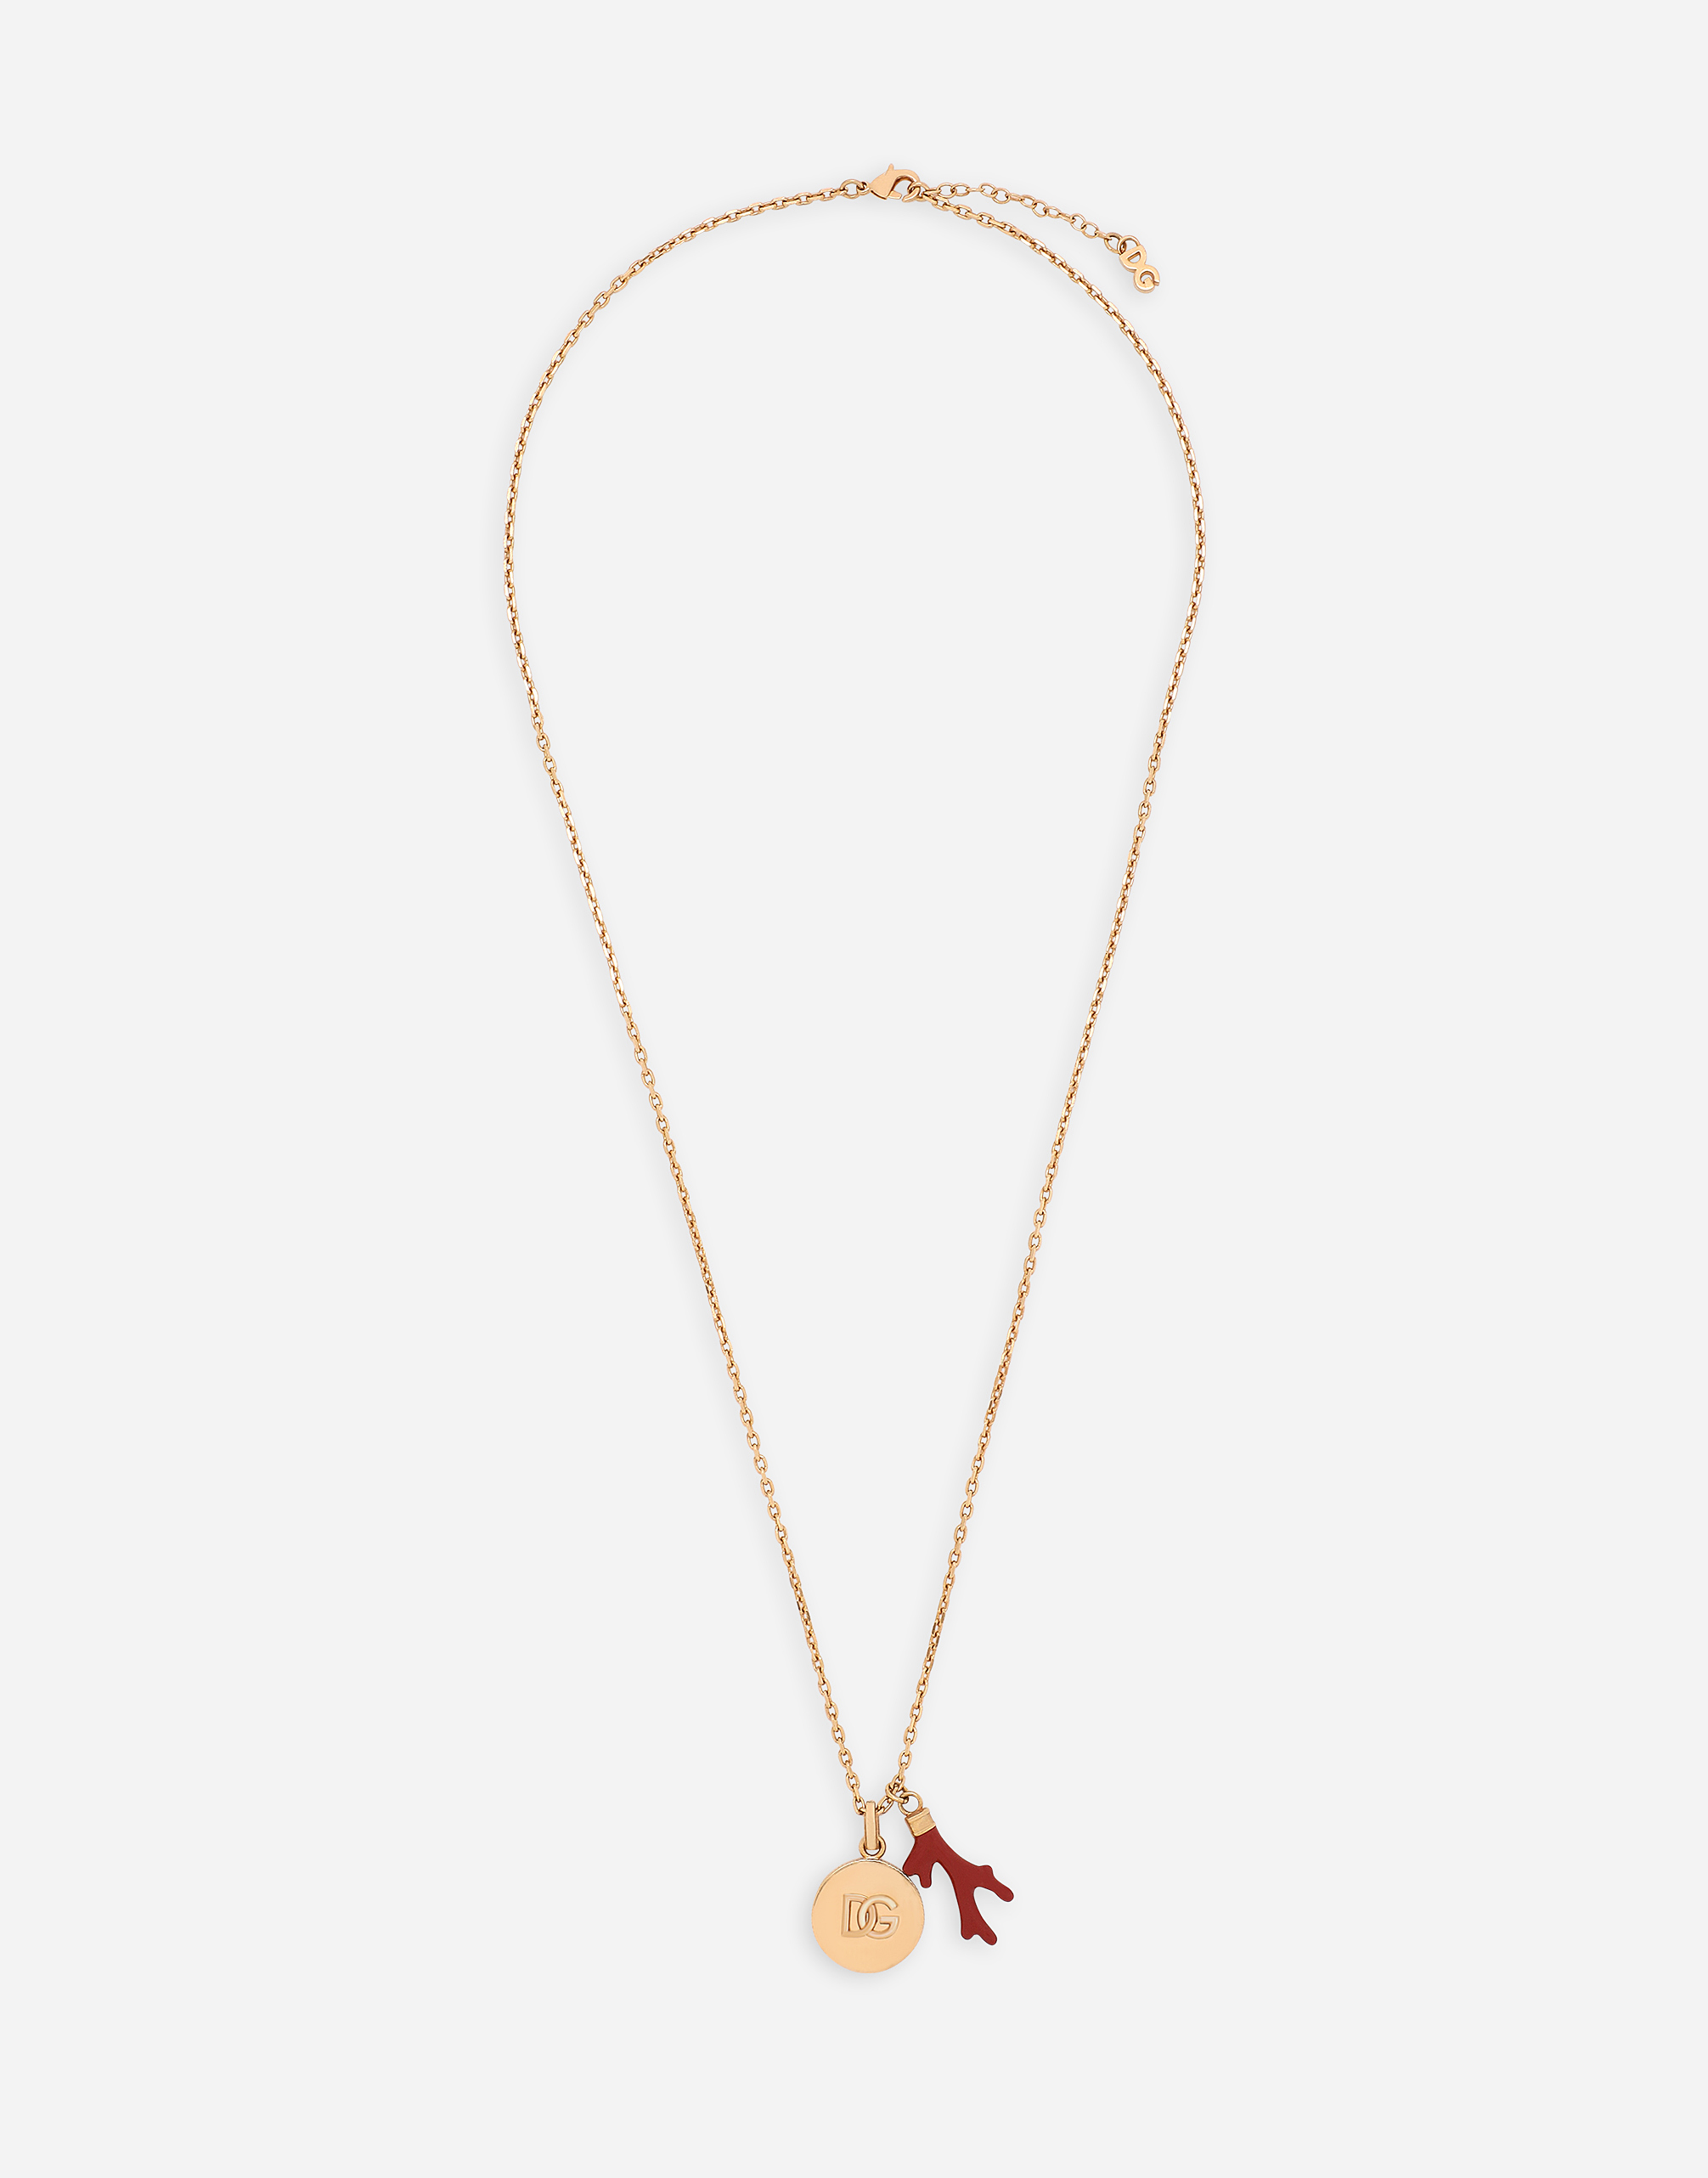 Necklace with DG logo pendant and coral embellishment in Gold